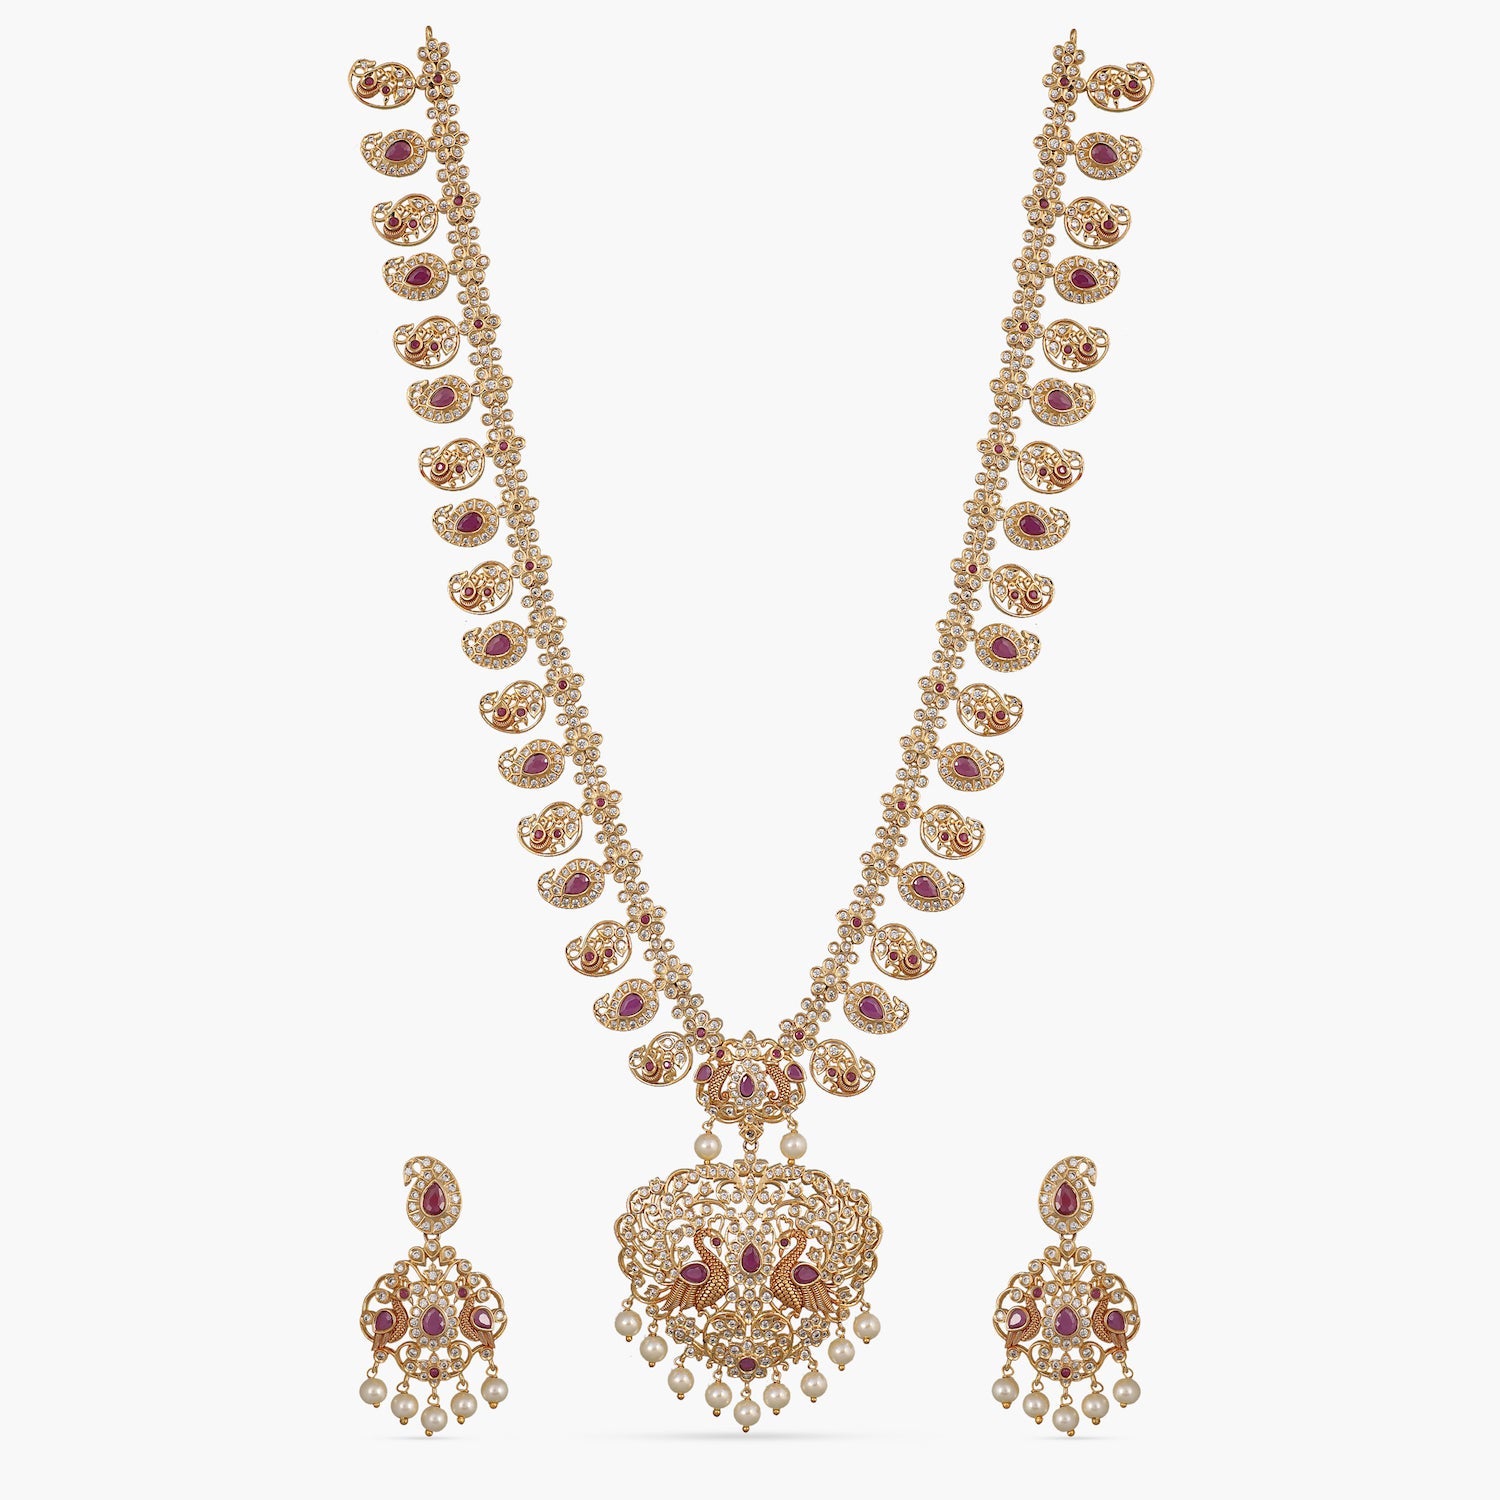 Long Necklace Sets Shopping, Buy Indian Long Necklace Sets Online Page 2 -  T…